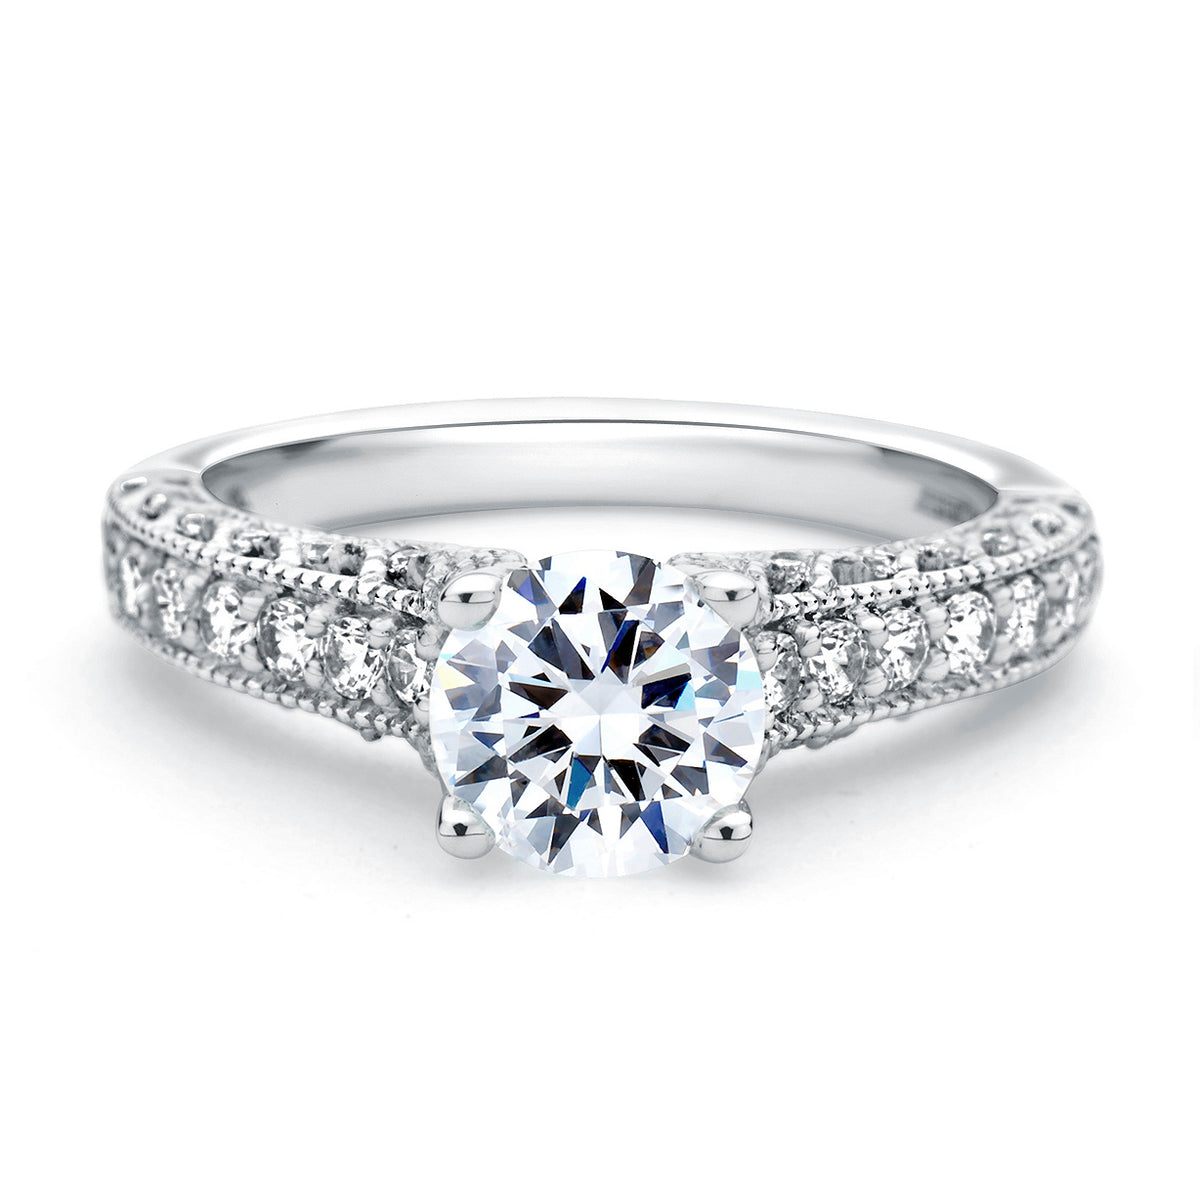 A.Jaffe Classic Milgrain with Intricate Diamond Gallery Accent Engagement Ring ME1664/137